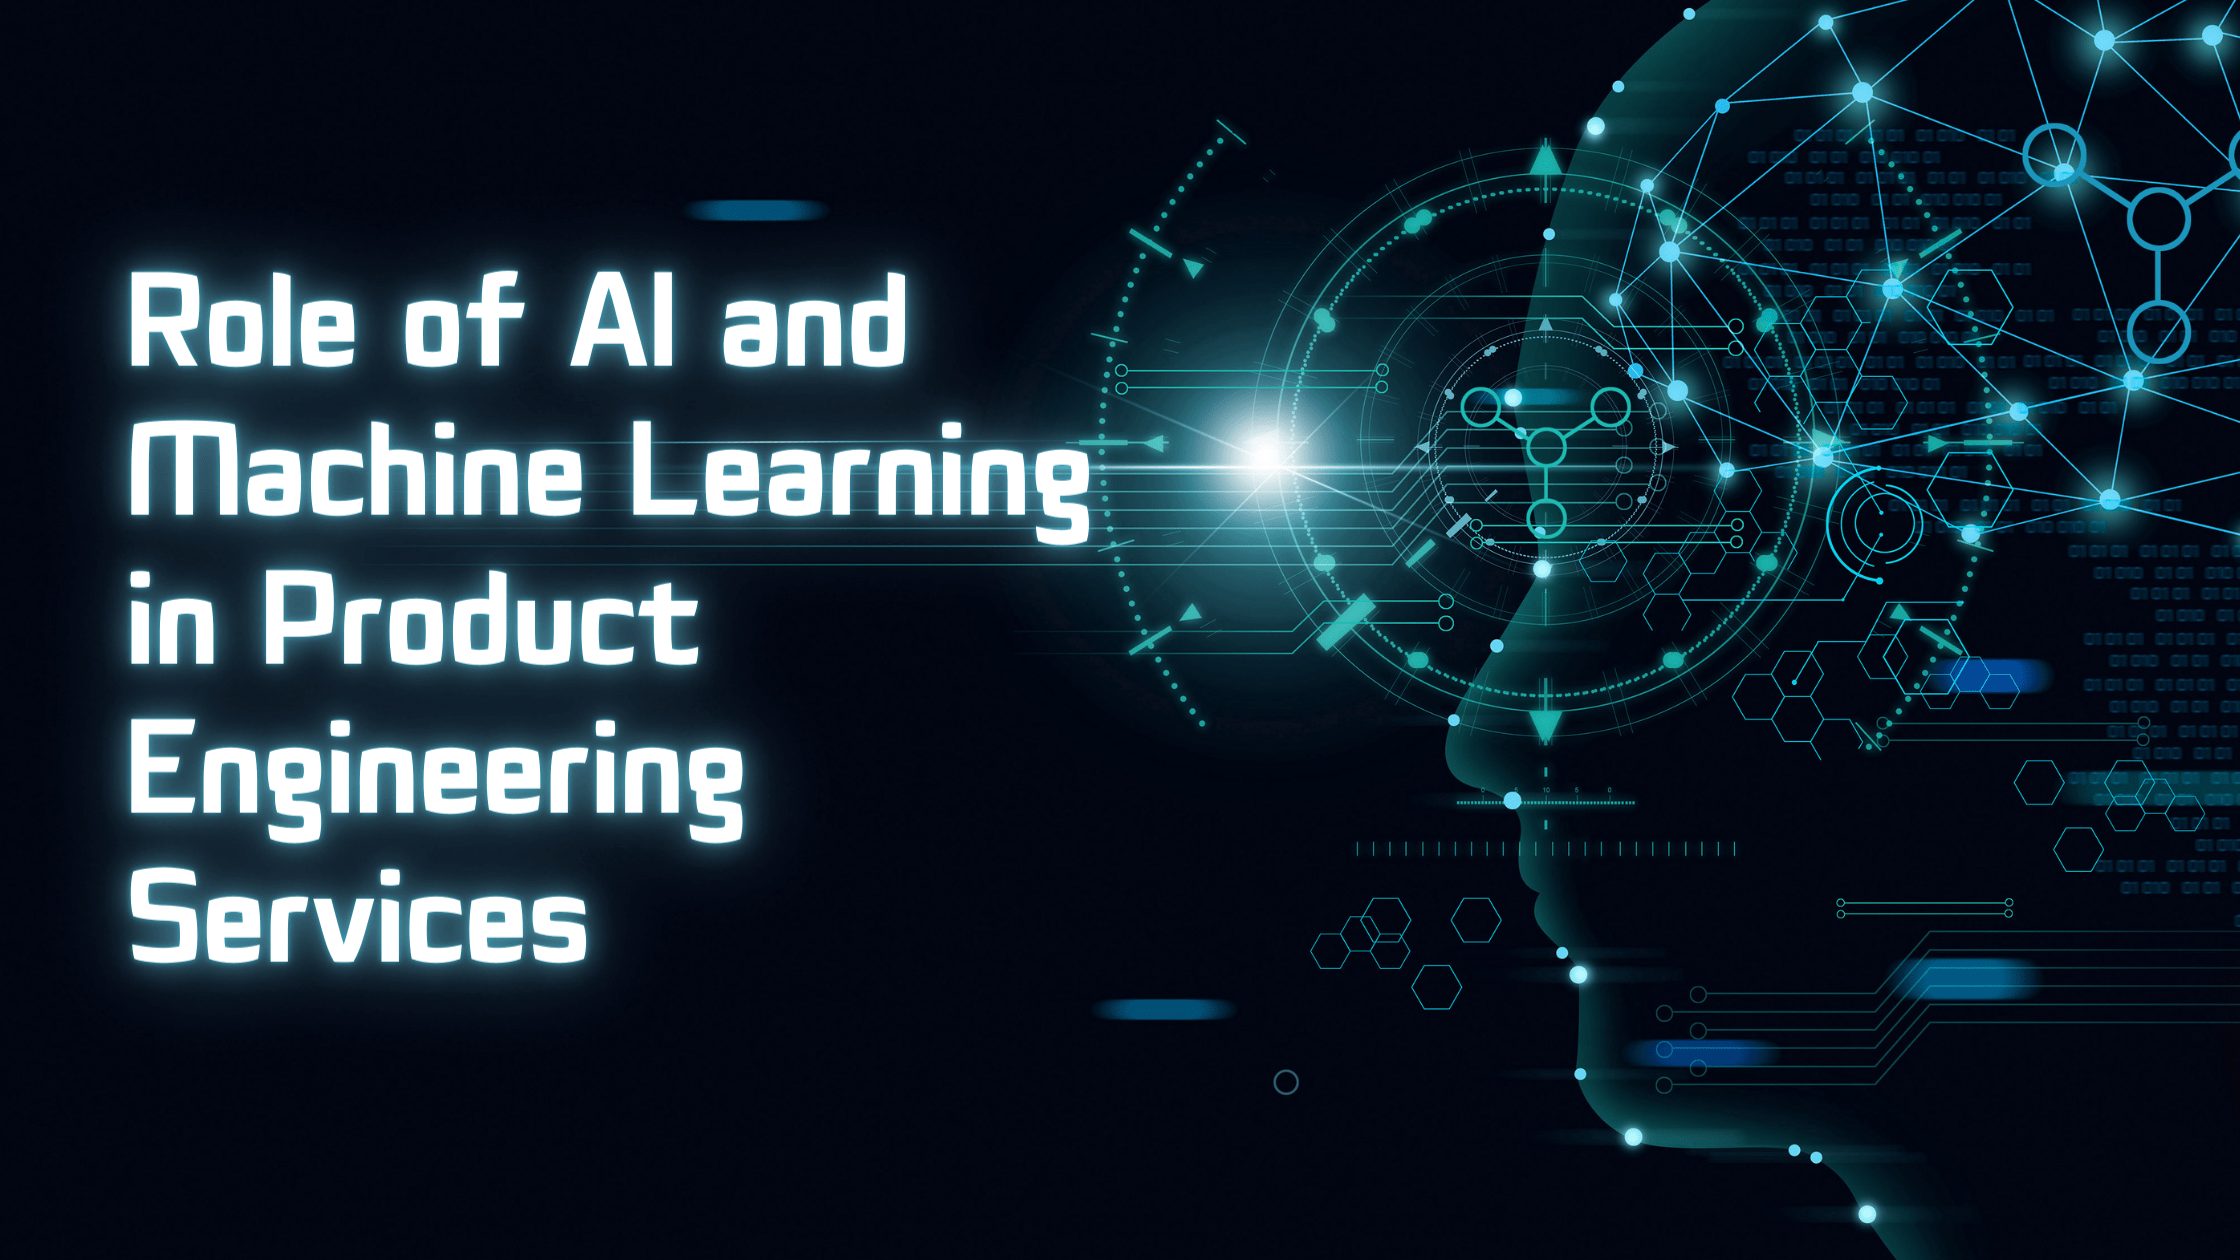 Role of AI and Machine Learning in Product Engineering Services